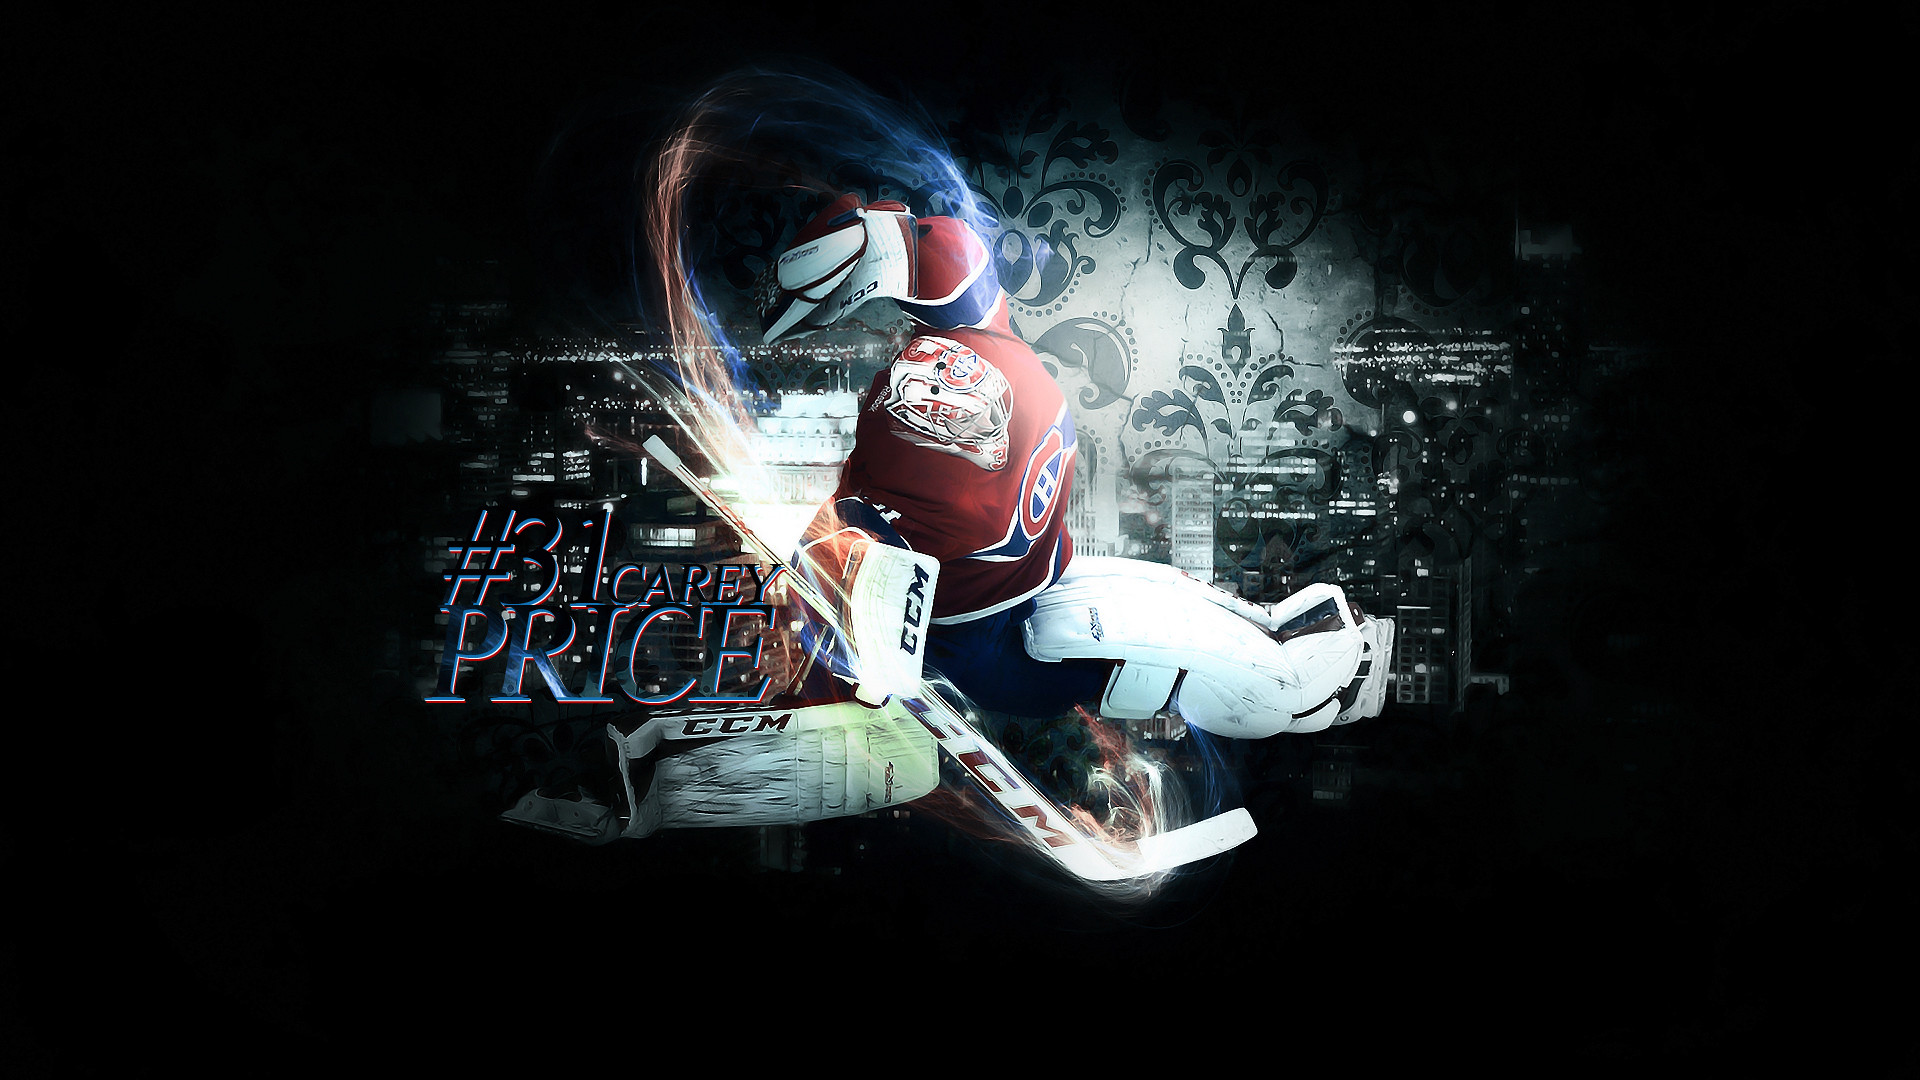 Daily hd wallpaper Carey Price Wallpaper I made for start of NHL 1920x1080